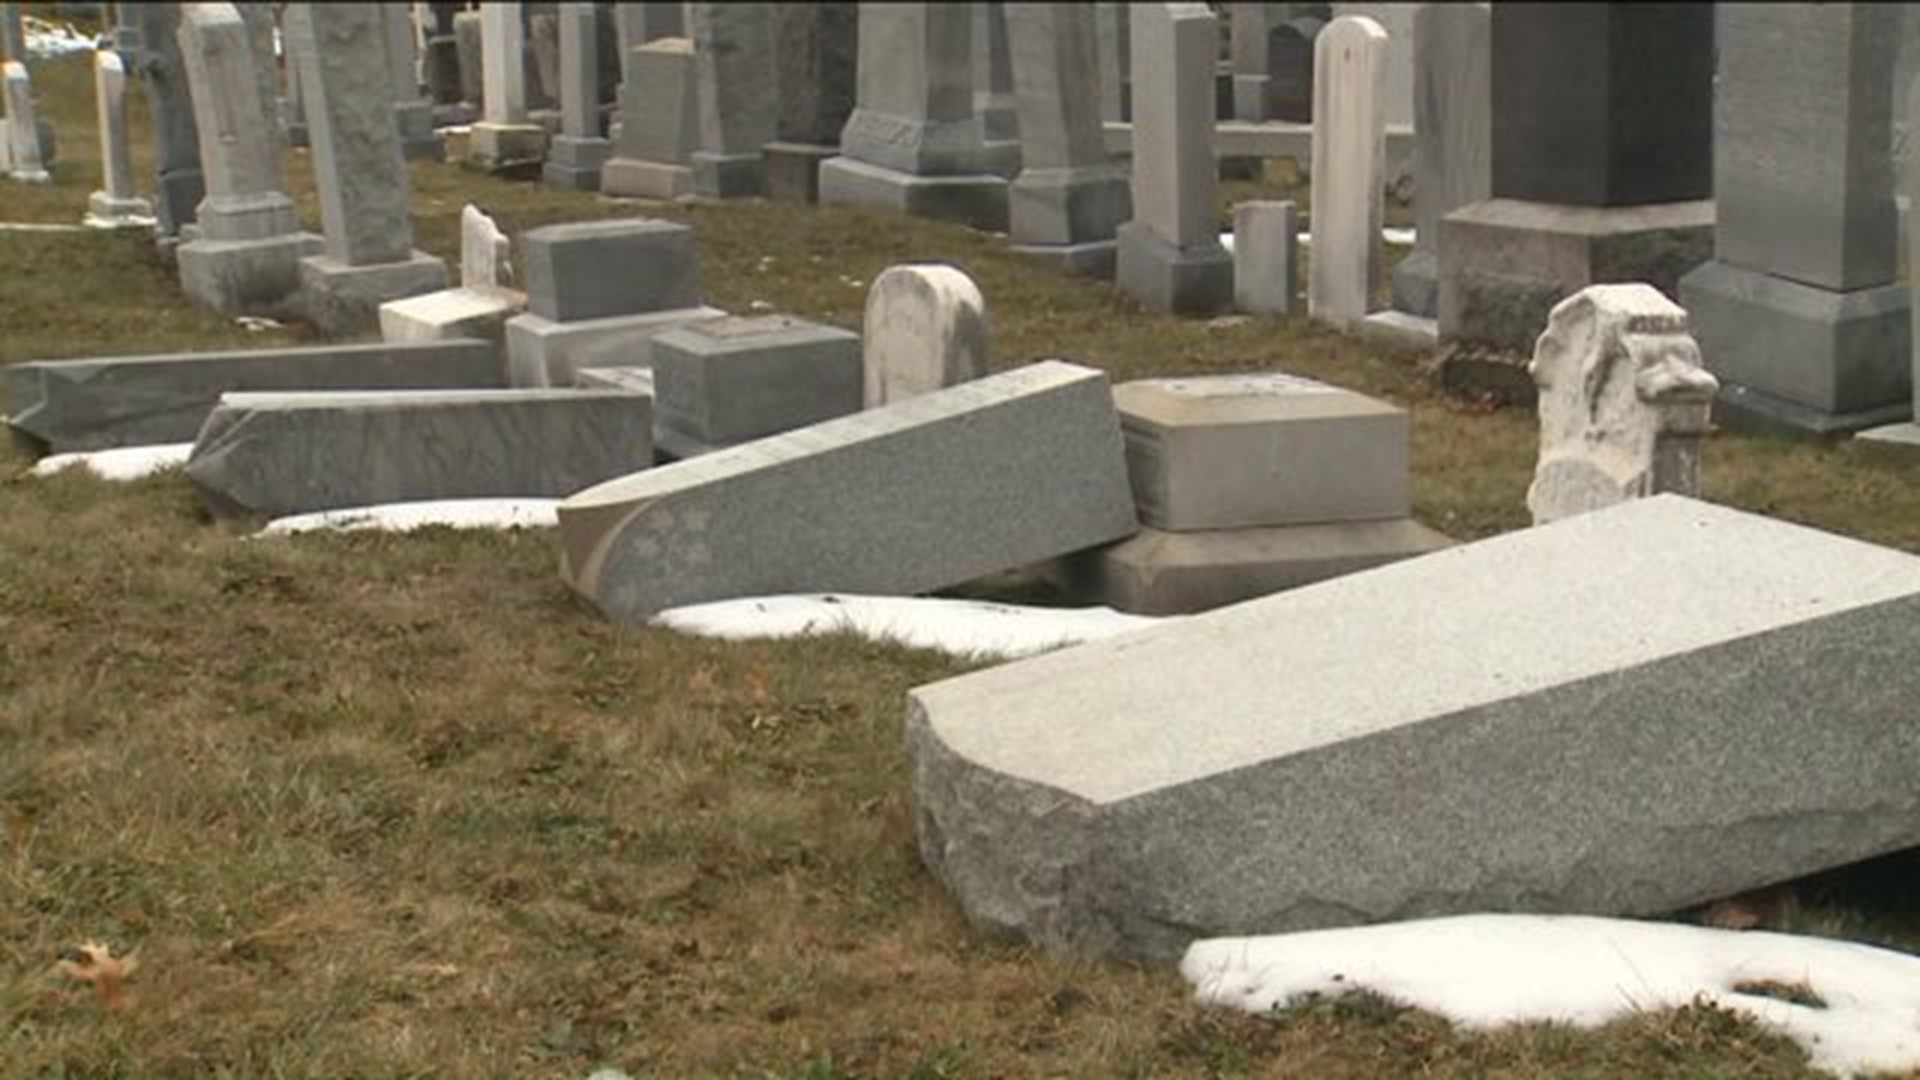 Toppled headstones at Hartford cemetery being investigated as hate crime